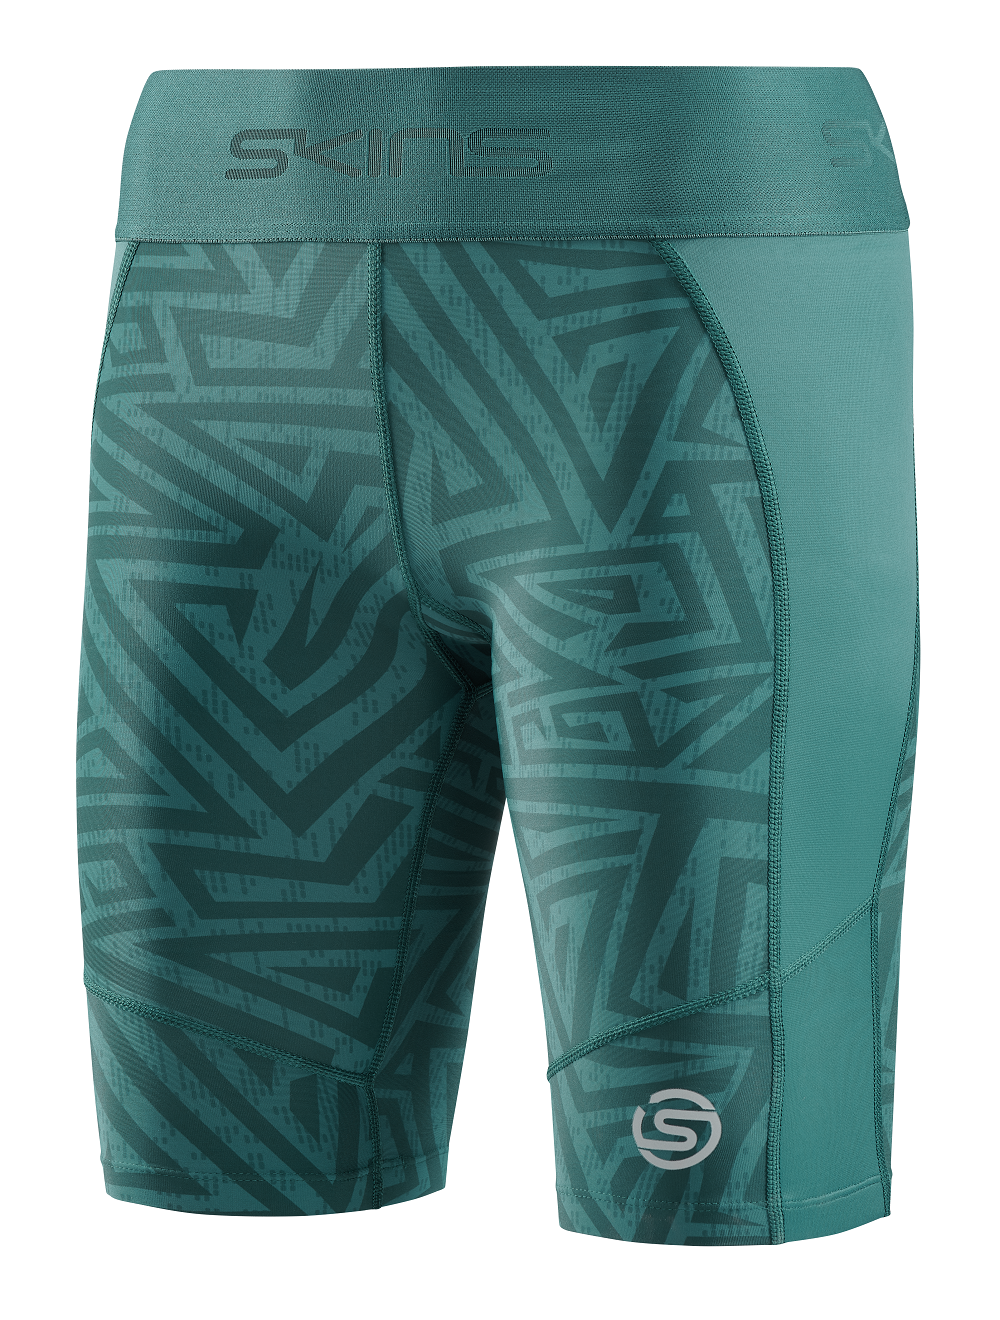 SKINS Women's Compression Half Tights 3-Series - Lt. Teal Angle